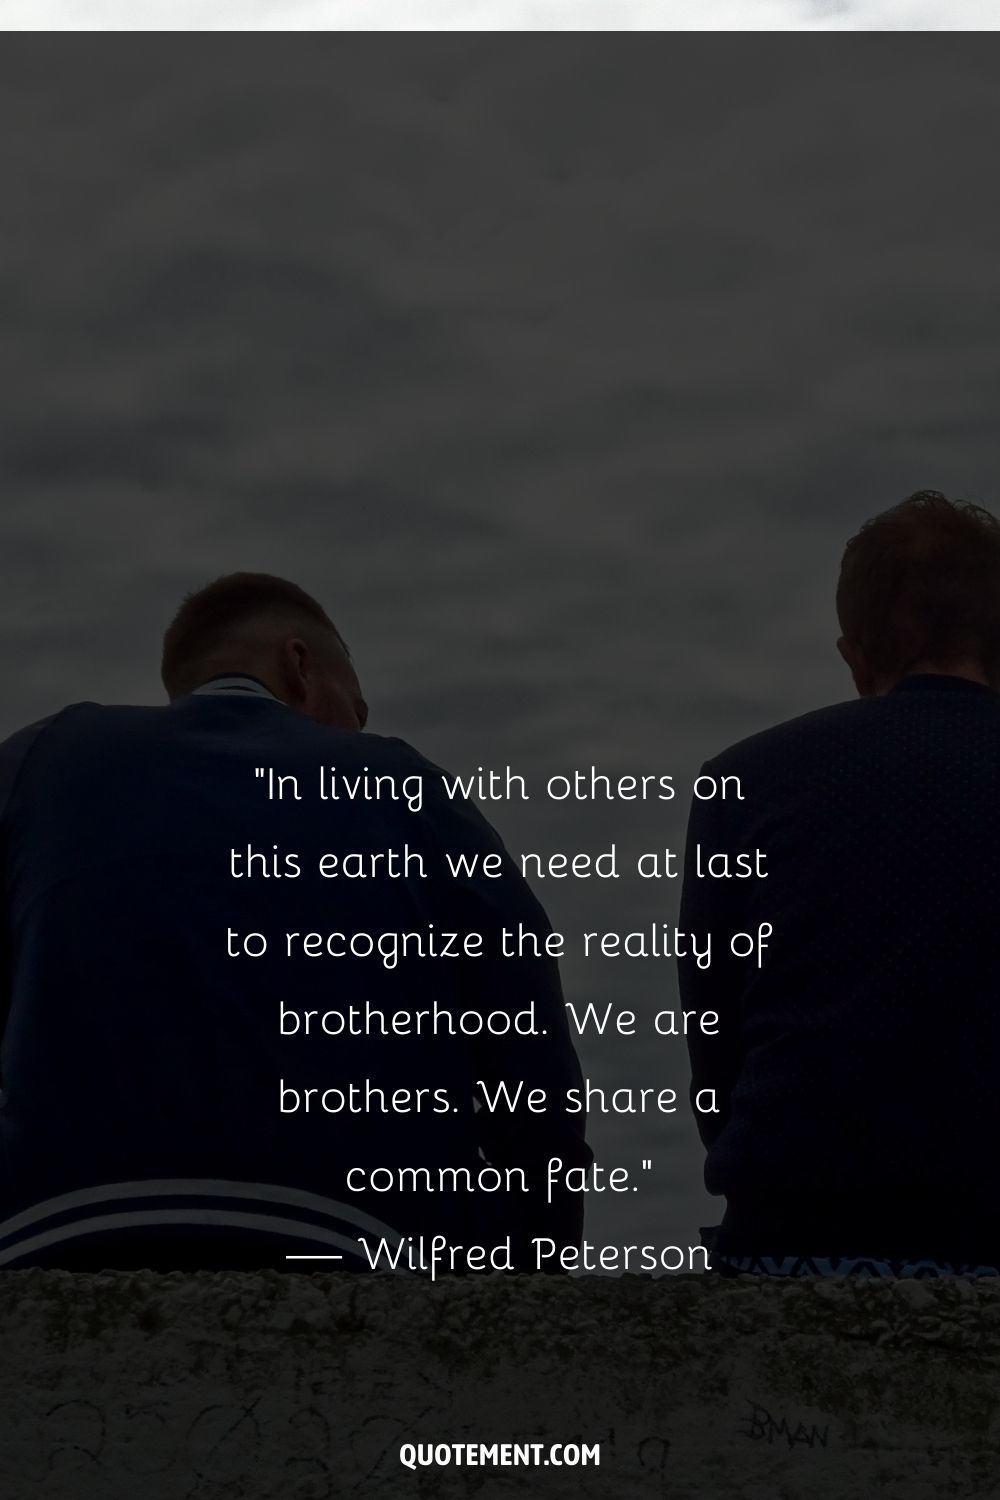 “In living with others on this earth we need at last to recognize the reality of brotherhood. We are brothers. We share a common fate.” — Wilfred Peterson